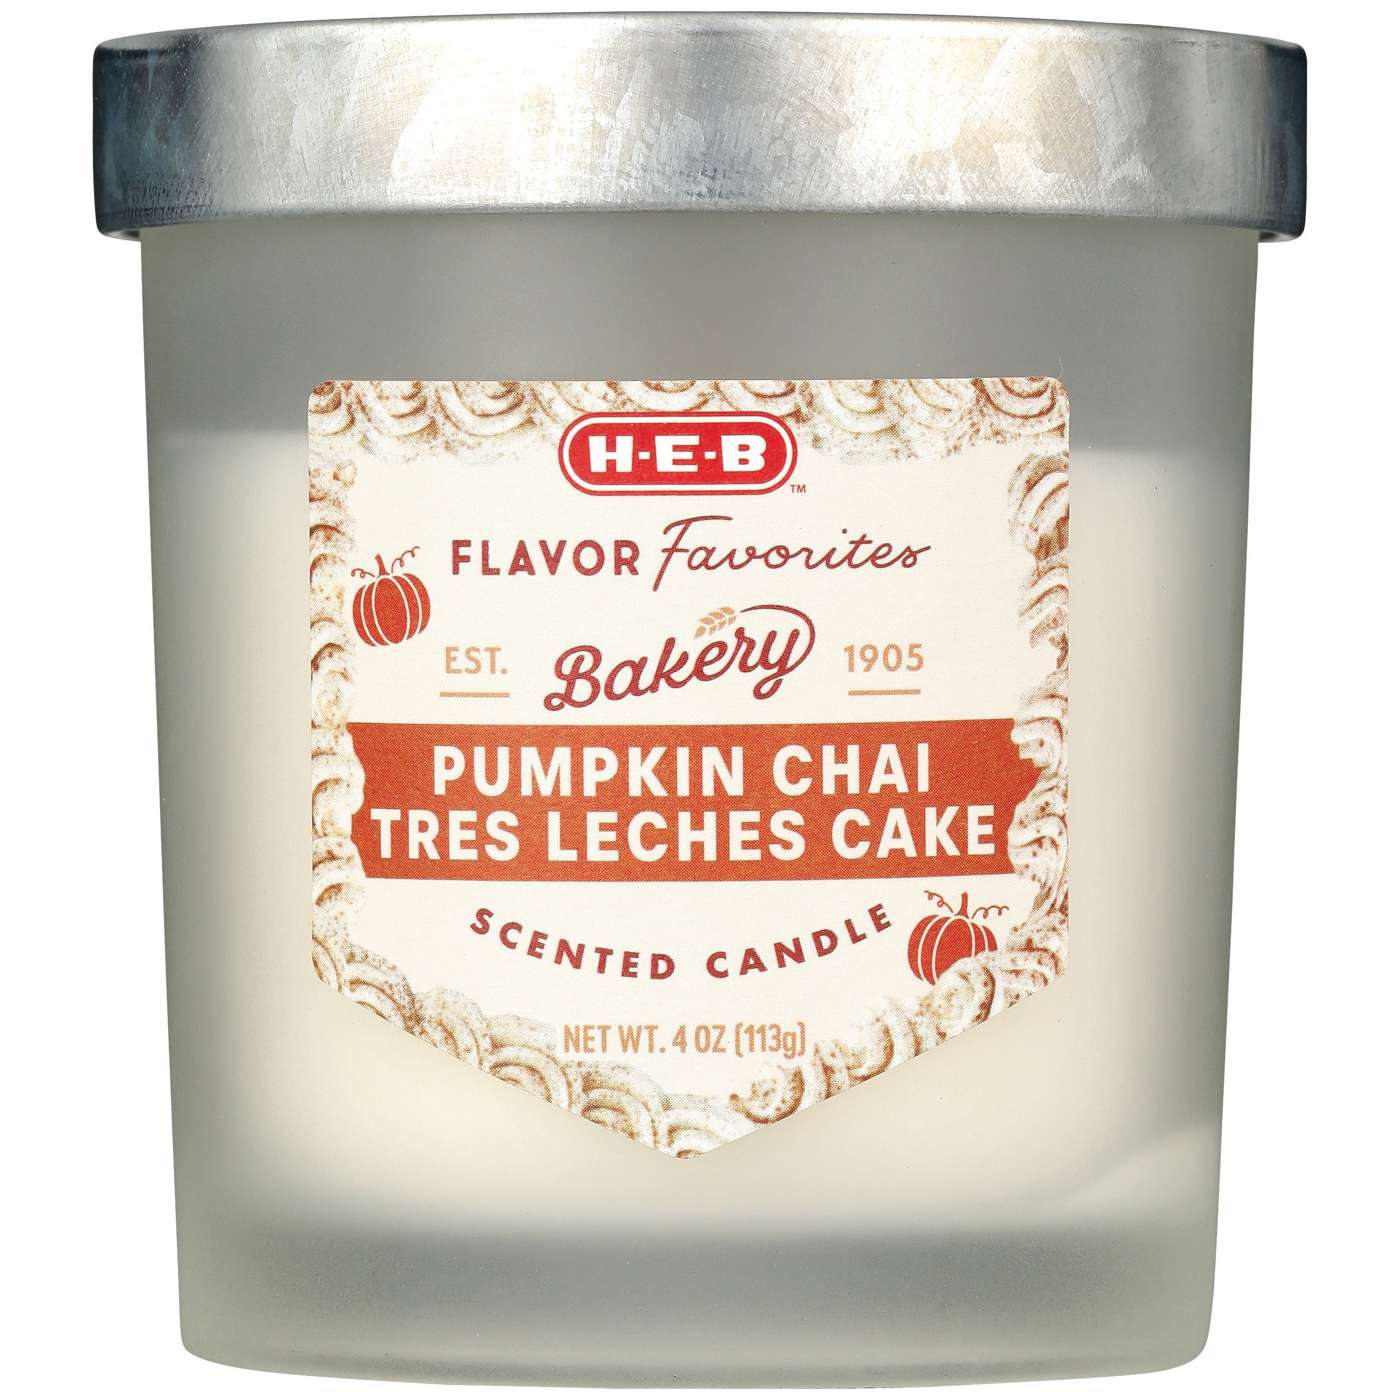 H-E-B Flavor Favorites Pumpkin Chai Tres Leches Cake Scented Candle; image 1 of 2